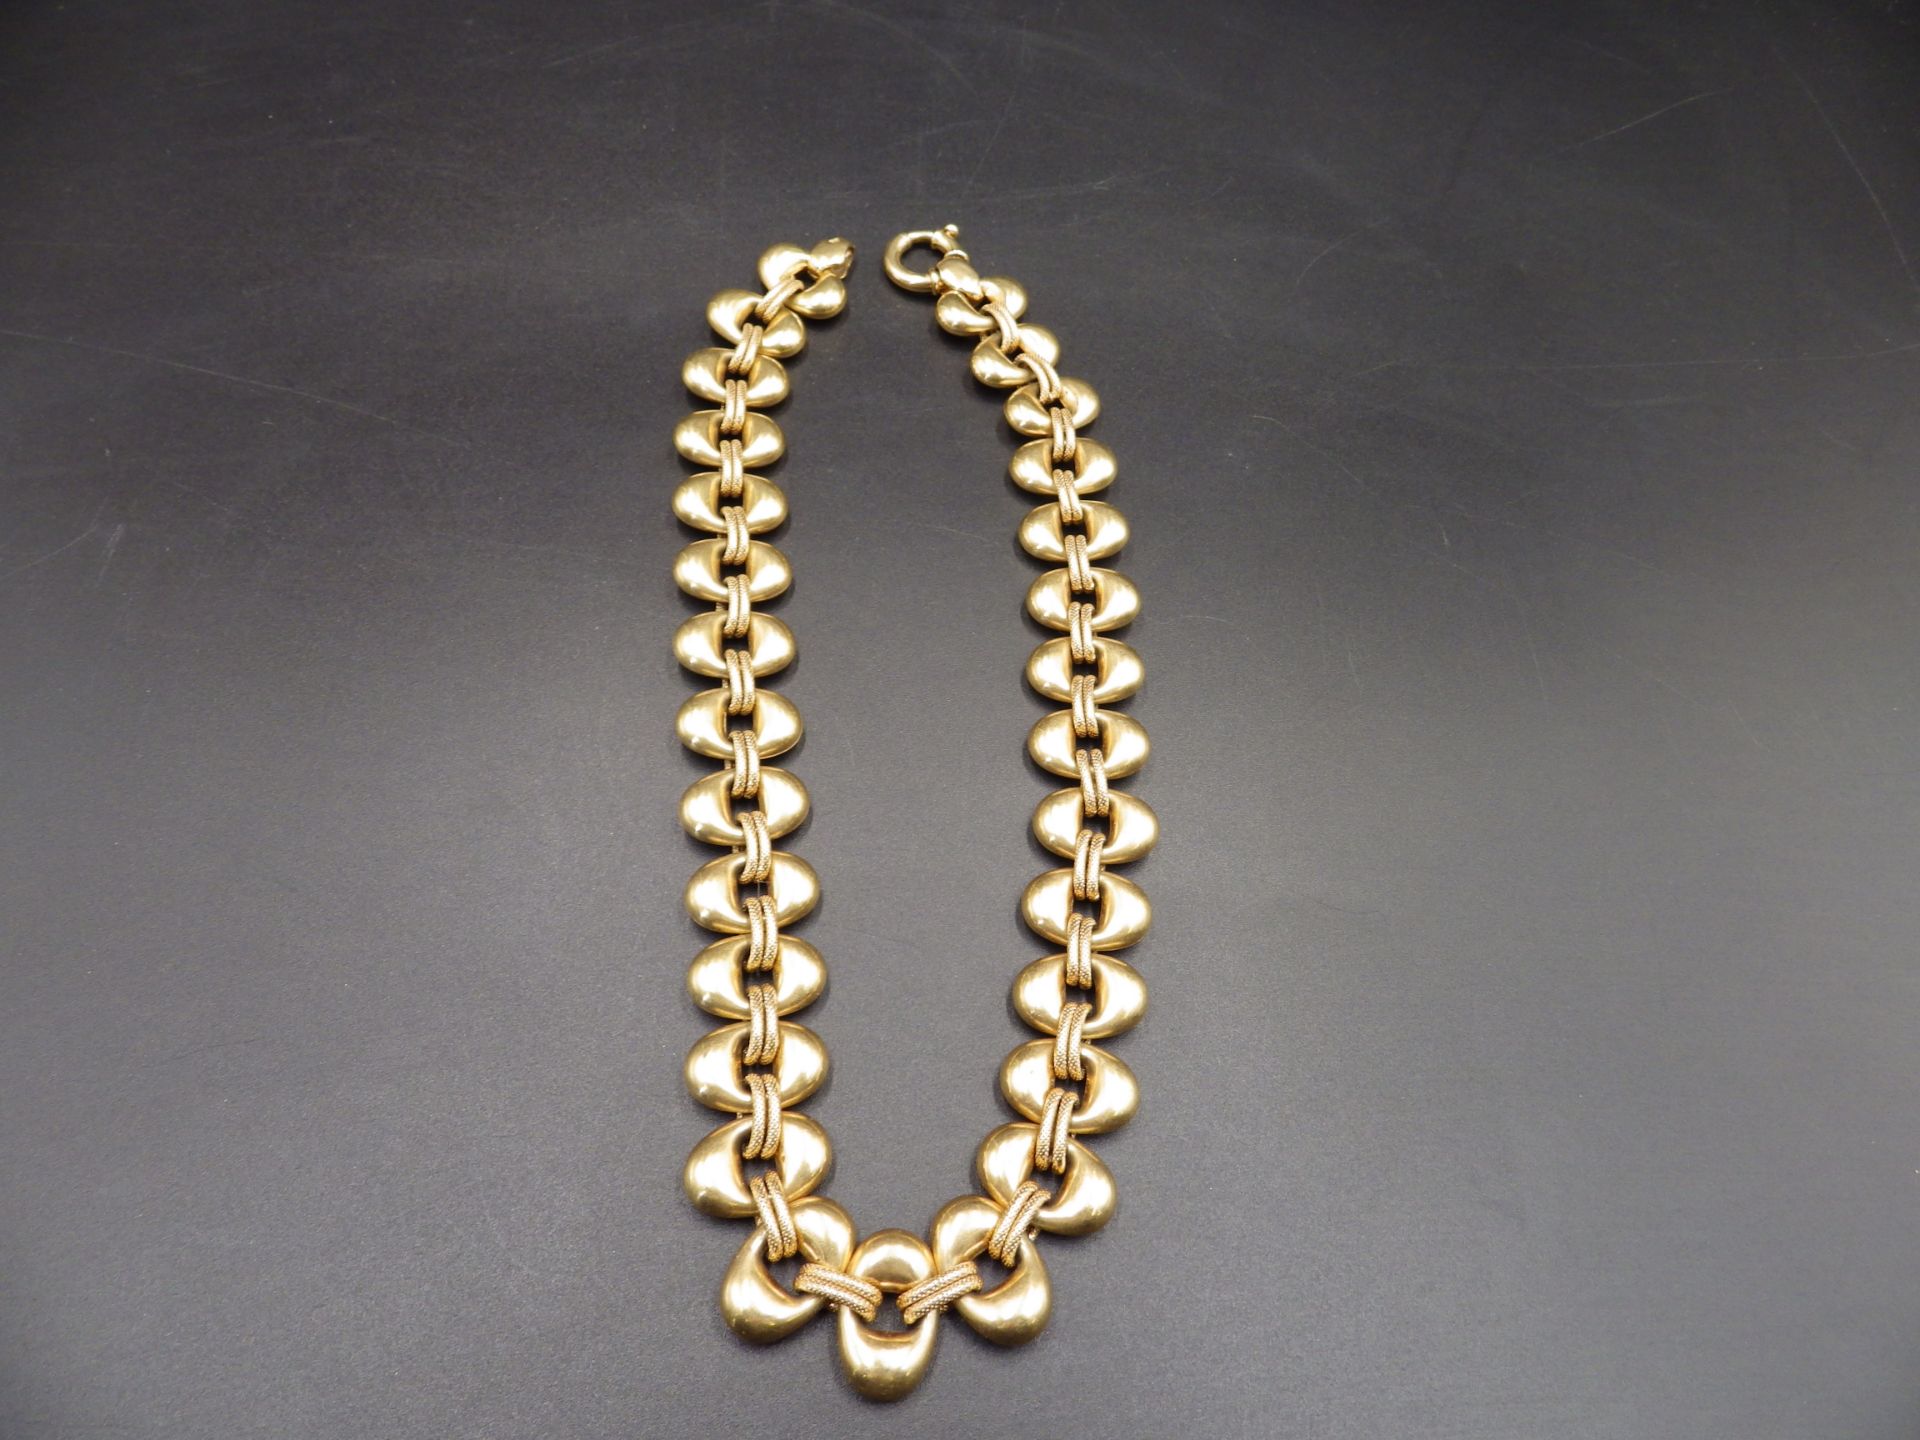 9ct Itailian gold chain by 'Unoaerre' 45cm in length and 48.60g total weight.